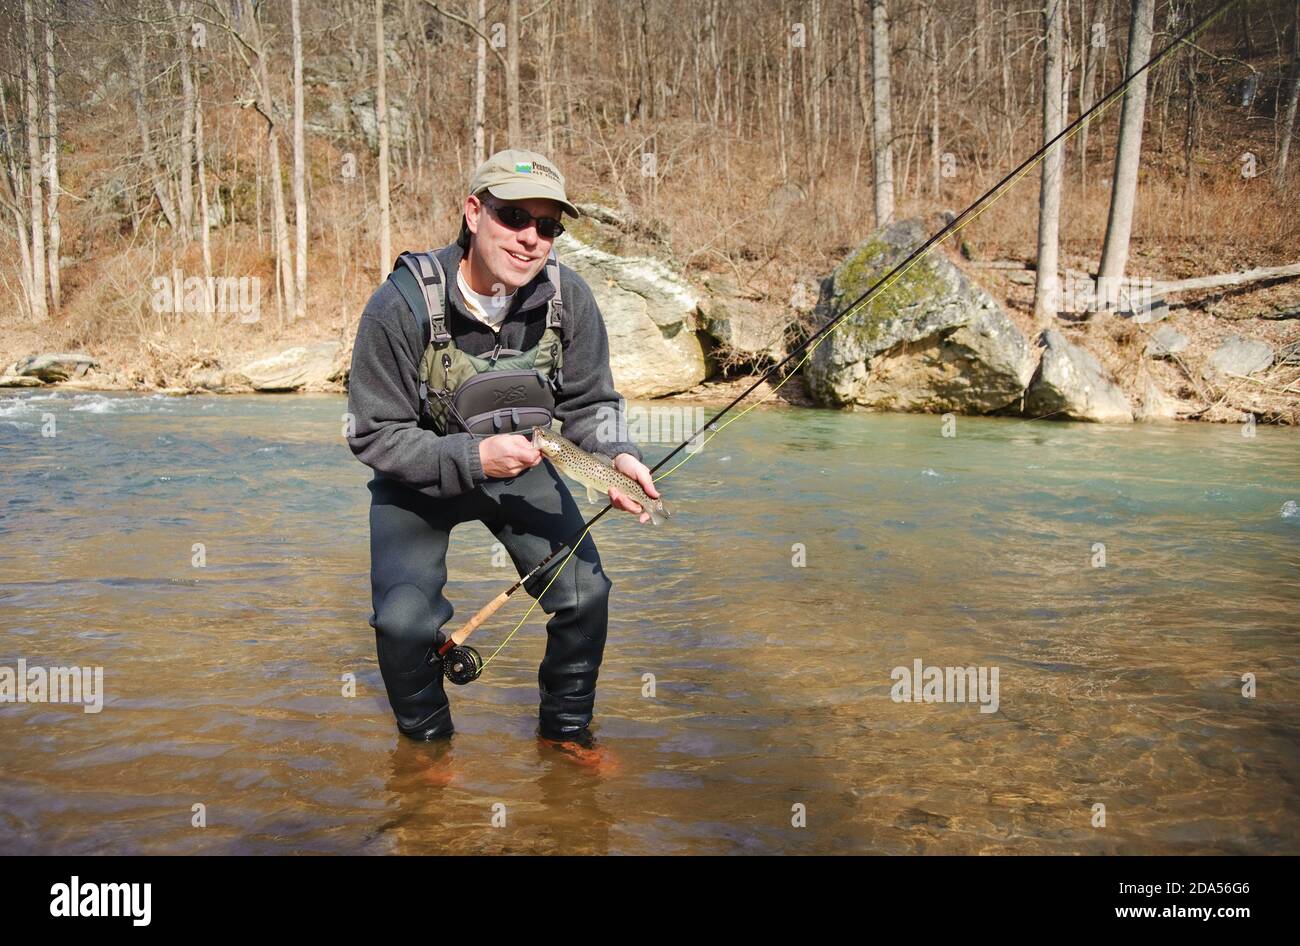 WINTER FLY FISHING HOLDING FRESH CAUGHT BROWN TROUT Stock Photo